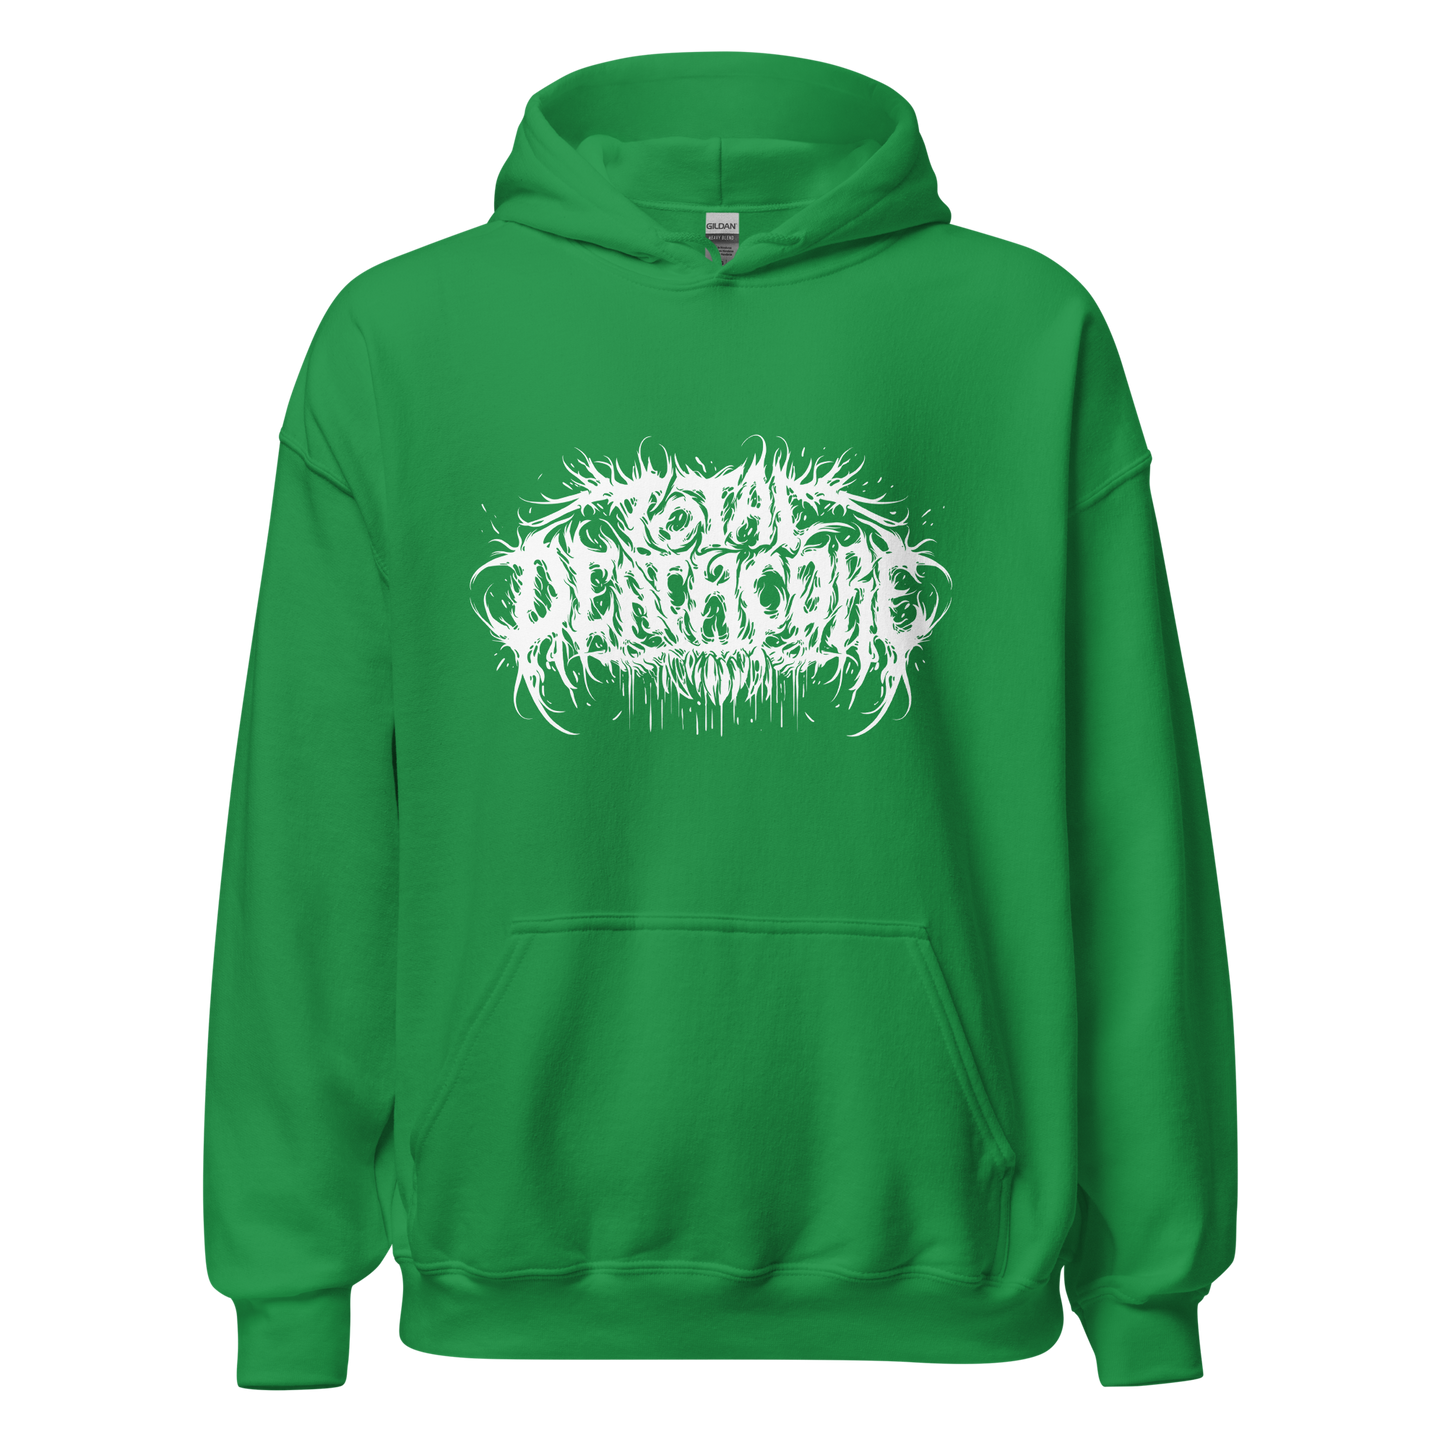 Total Deathcore "THE LOGO" - Unisex Hoodie